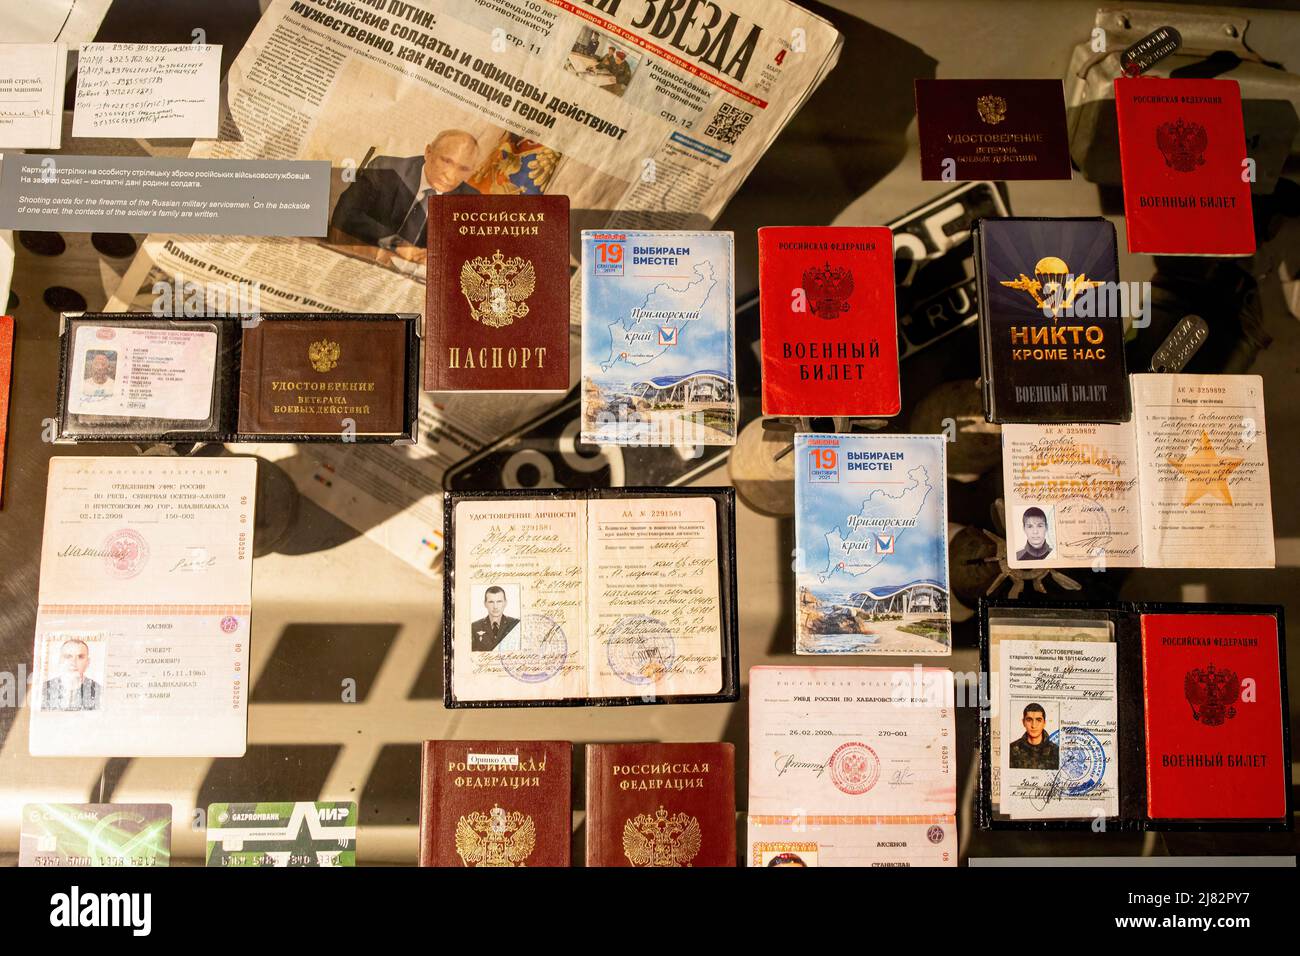 A display of a collection of personal identification documents from the fallen Russian soldiers found at the de-occupied villages around Kyiv shows at the exhibition at the National Museum of the History of Ukraine. 'Ukraine: Crucifixion' exhibition opens in the National Museum of the History of Ukraine dedicated to the Russian invasion to Ukraine, particularly in Kyiv. The exhibition displayed a collection of evidences of war from the de-occupied villages around Kyiv. Russia invaded Ukrainian territory on February 24, 2022, triggering the largest military attack in Europe since World War II. Stock Photo